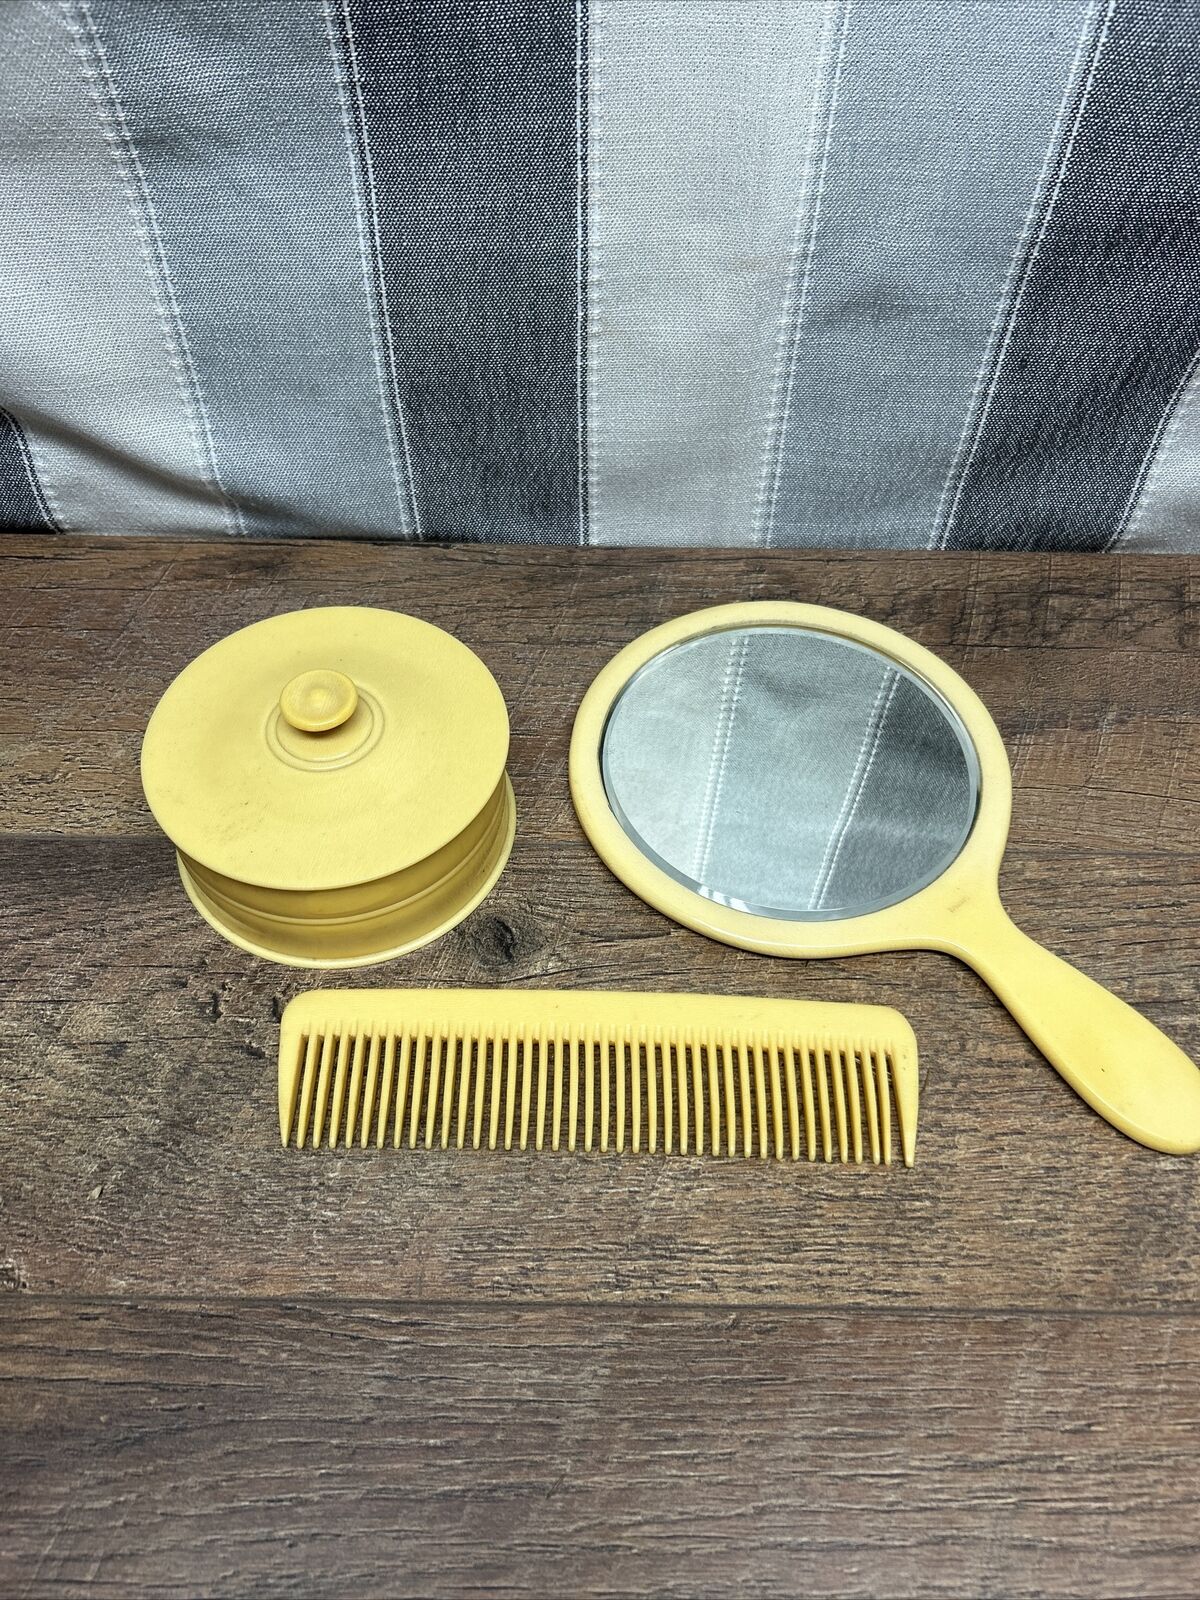 Vintage Ivory Grooming Set-mirror-comb-container